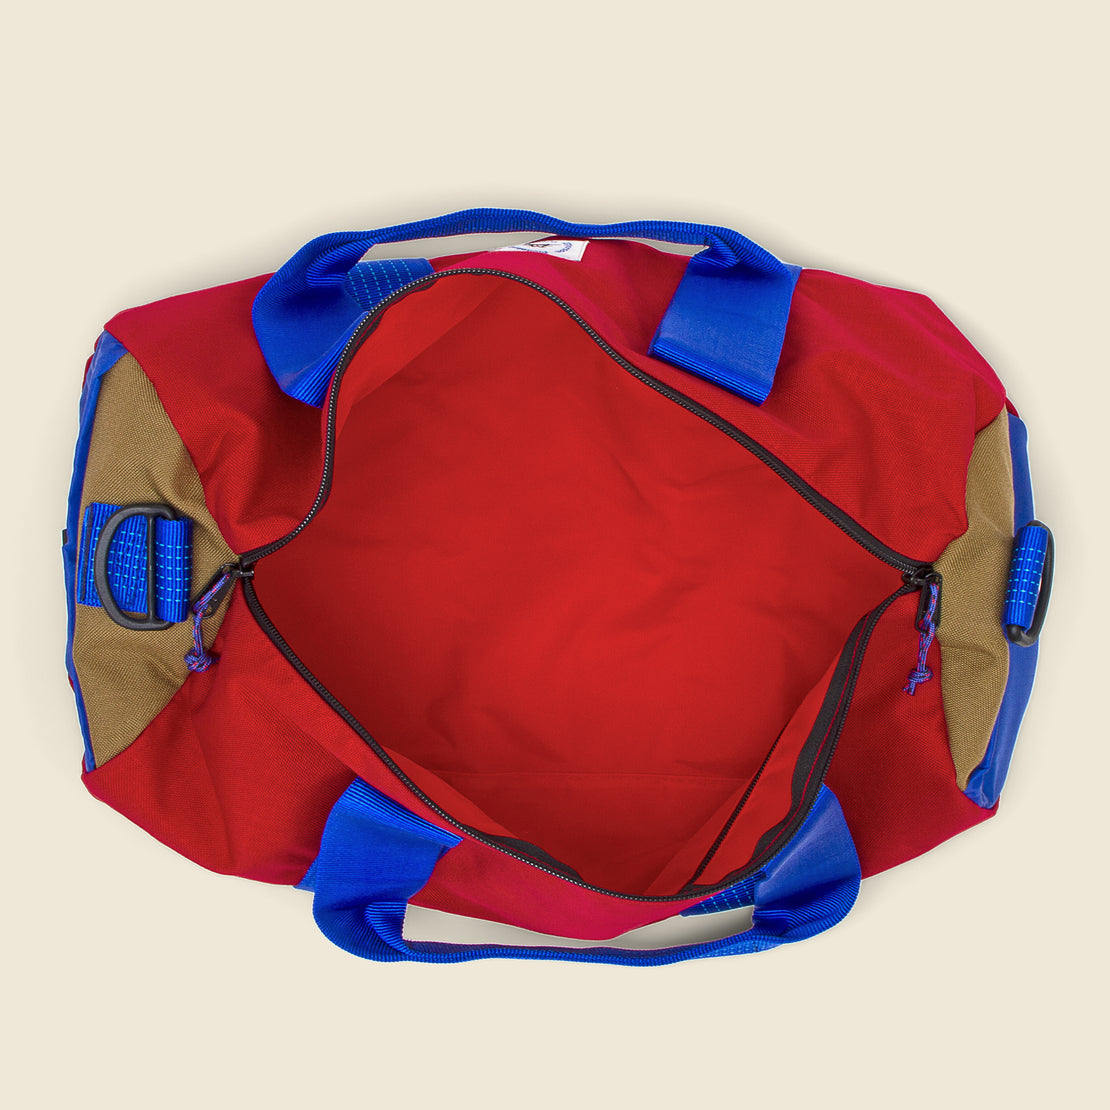 Duffle Bag - Barn Red - Epperson Mountaineering - STAG Provisions - Accessories - Bags / Luggage